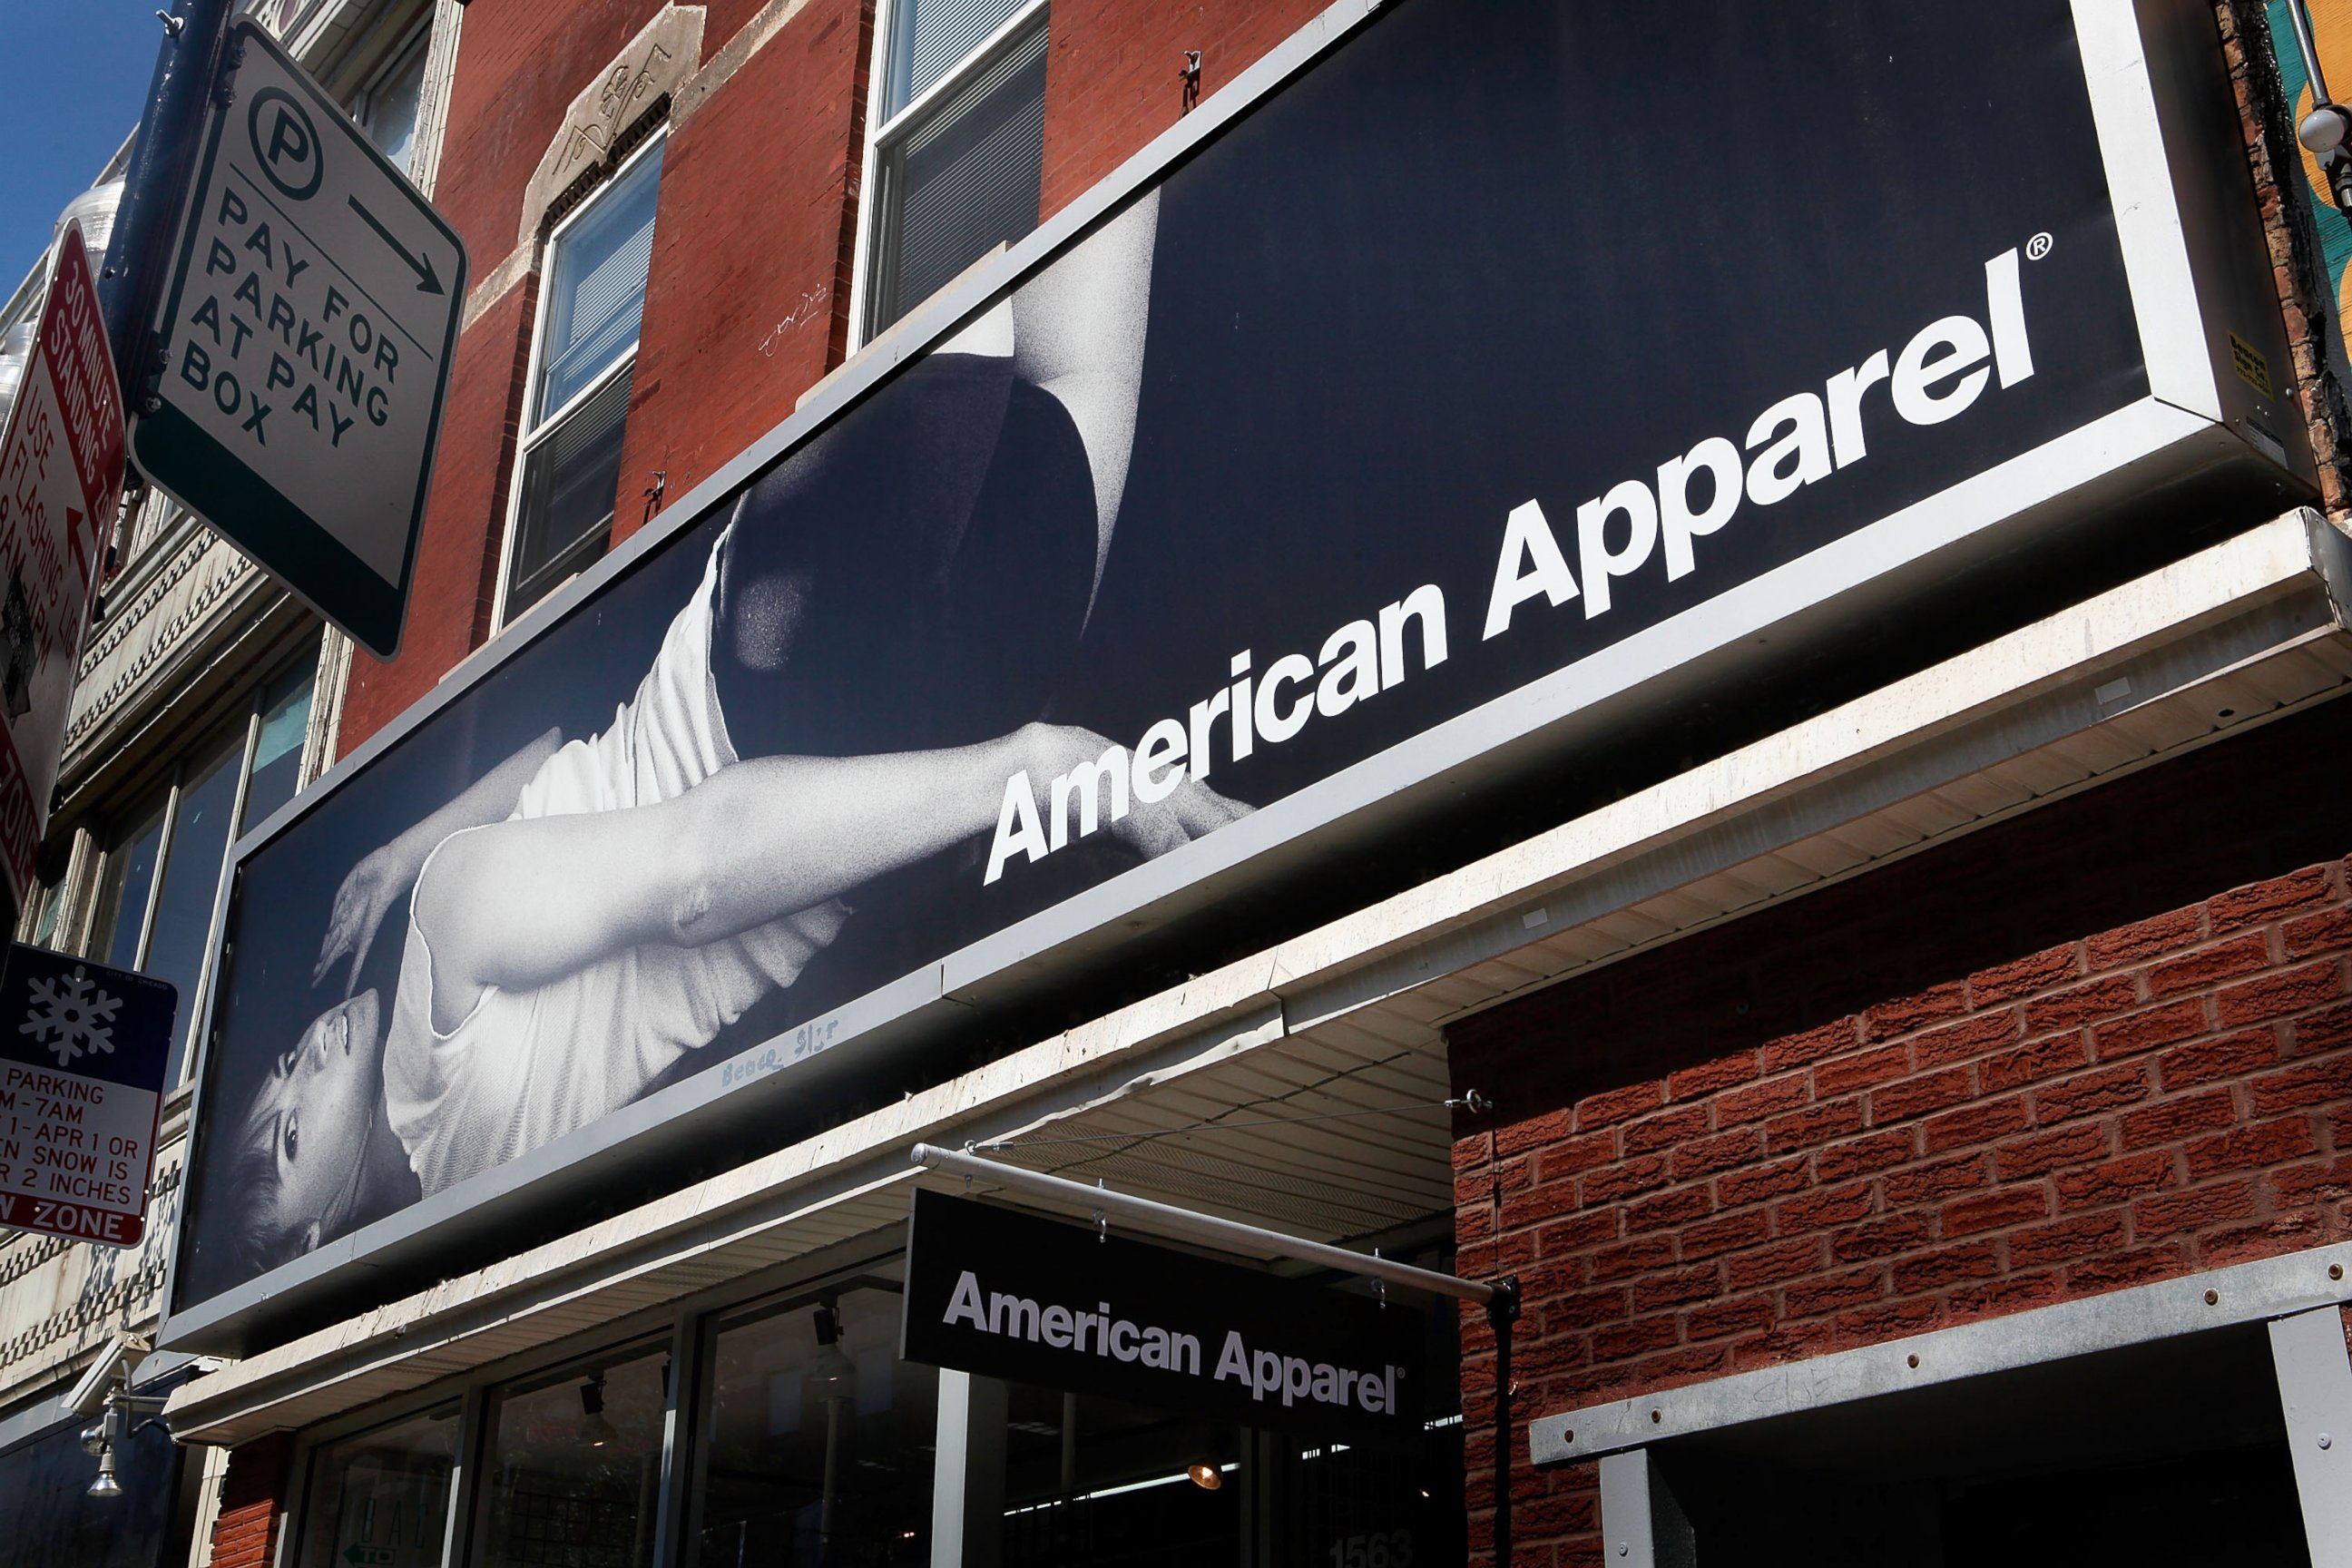 PHOTO: A sign hangs above an American Apparel store in Chicago's Wicker Park neighborhood, Sept. 4, 2009.